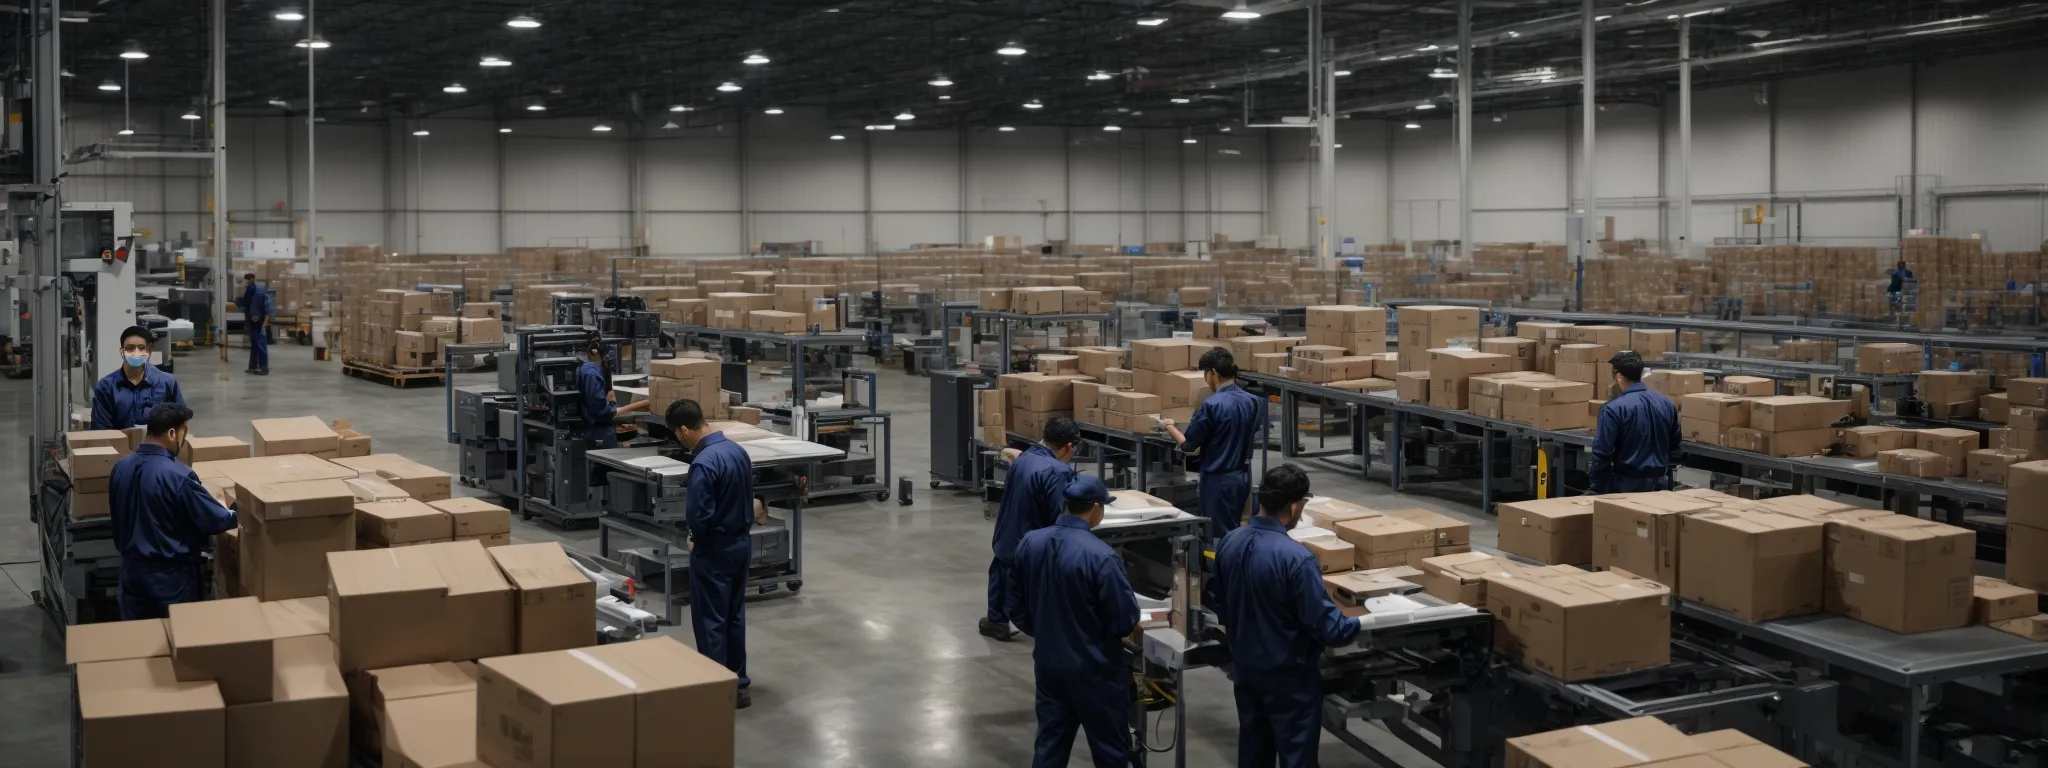 a streamlined warehouse operation with workers efficiently organizing and scanning boxes using advanced software on tablets and computers.